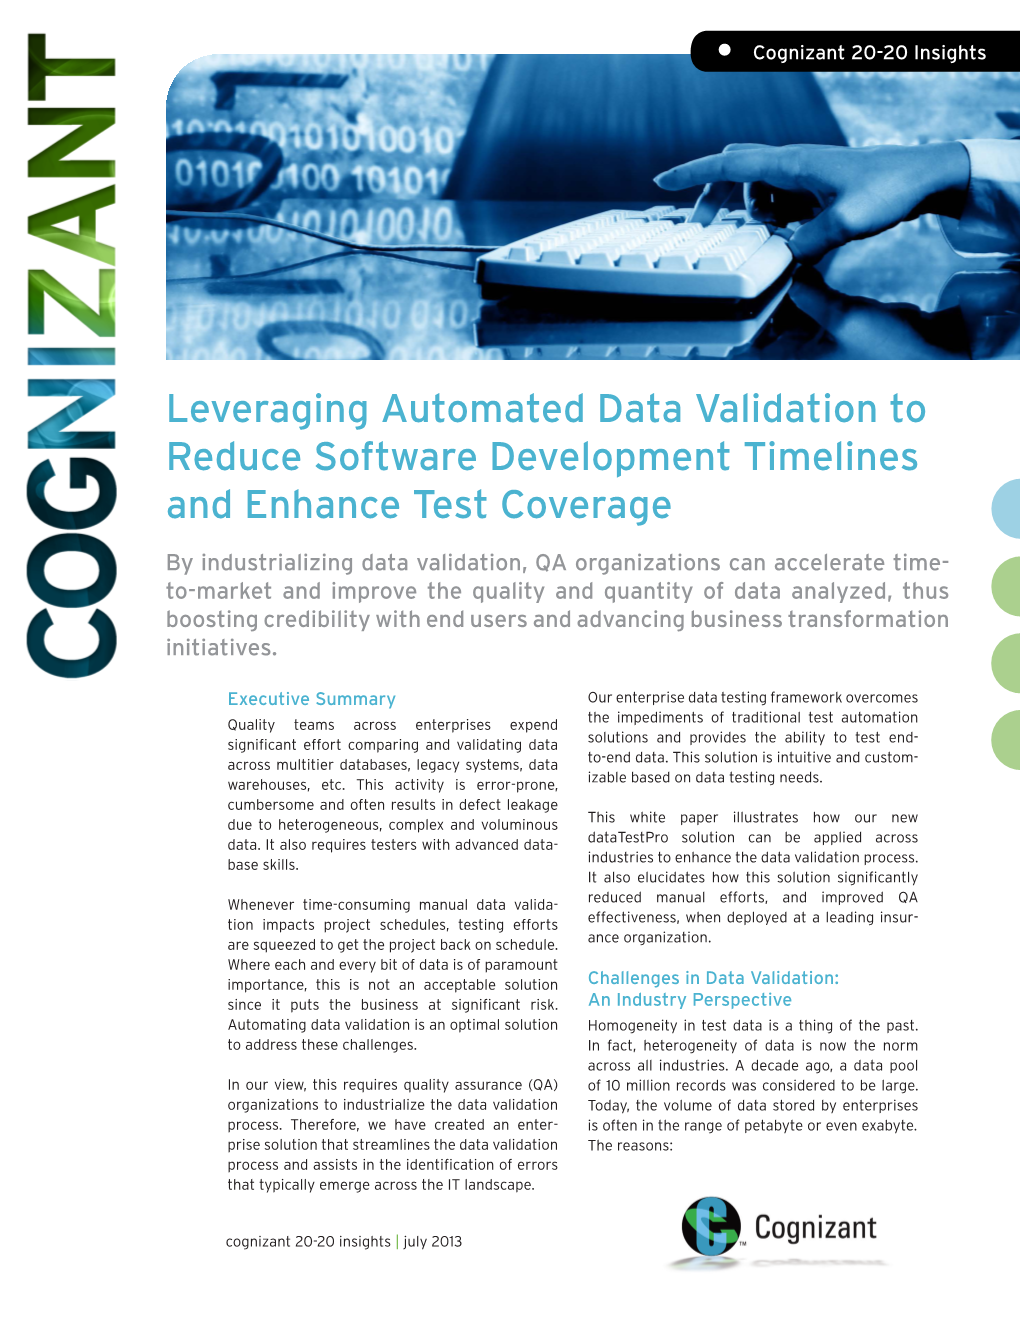 Leveraging Automated Data Validation to Reduce Software Development Timelines and Enhance Test Coverage